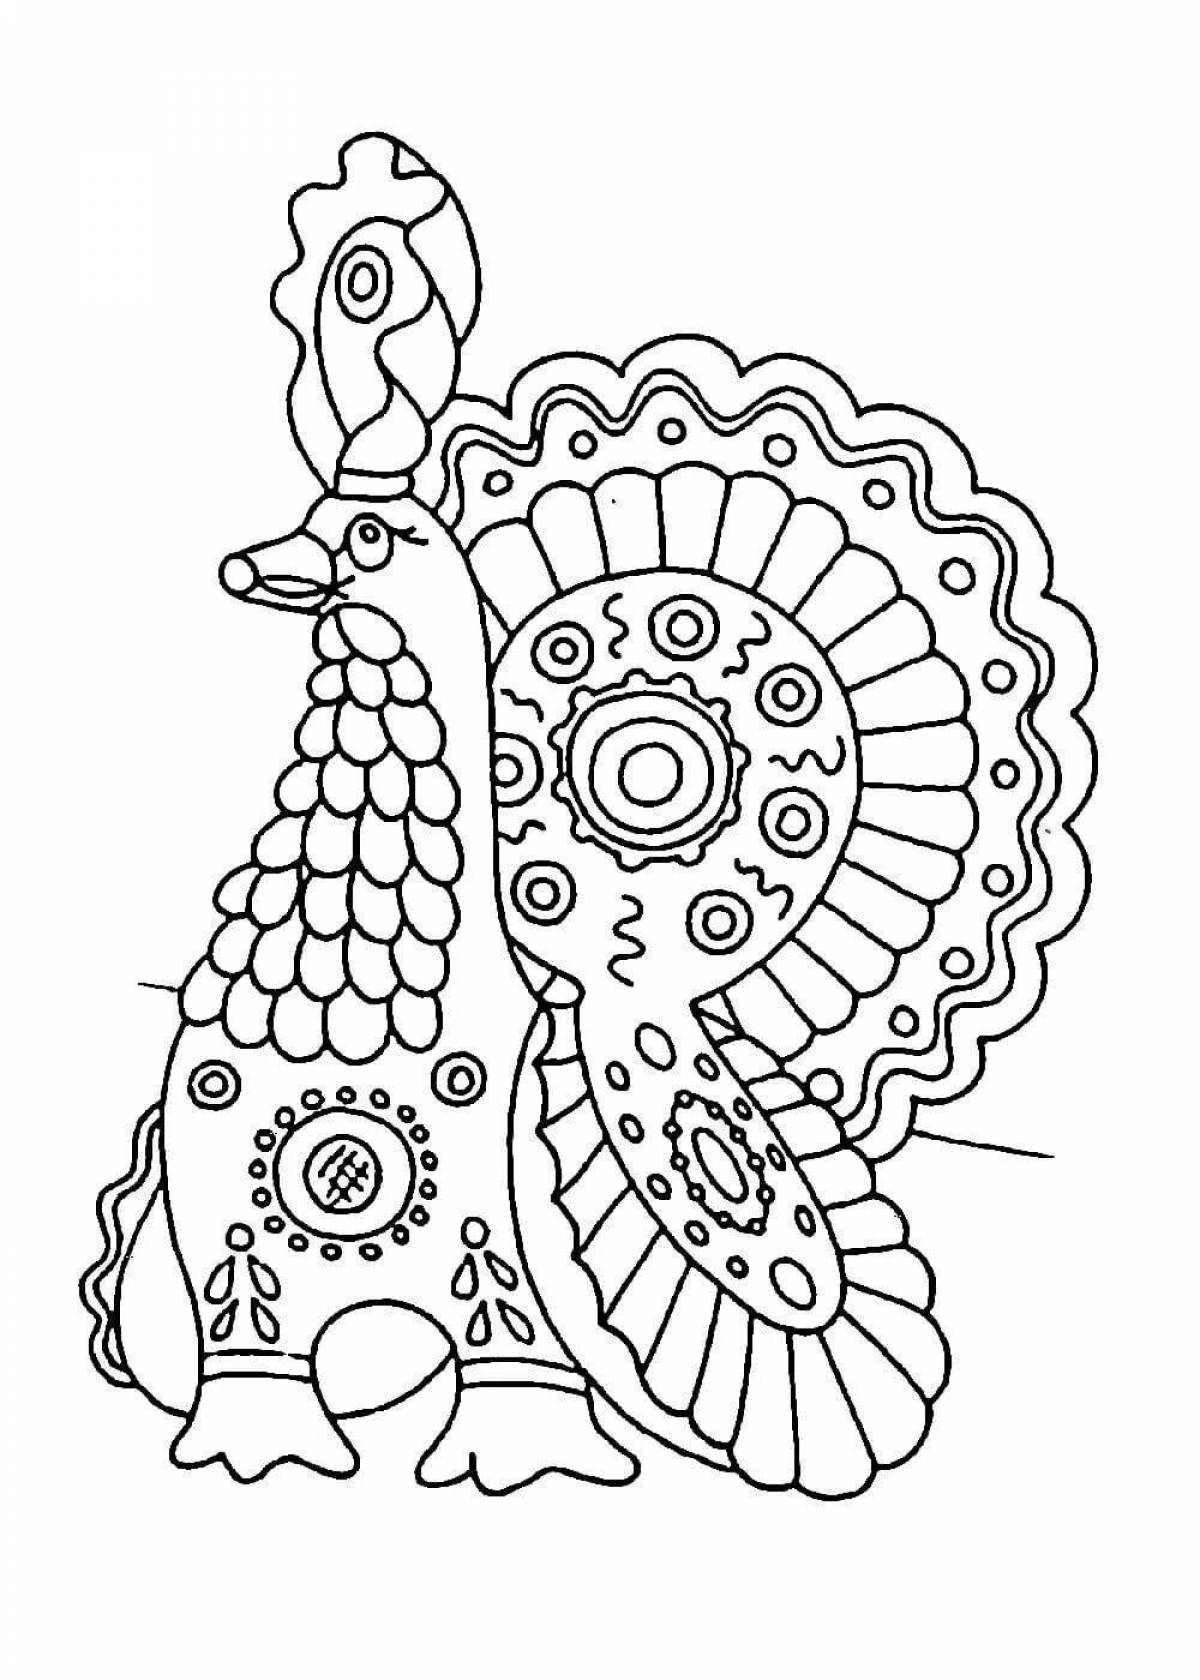 Amazing Dymkovo rooster coloring book for preschoolers